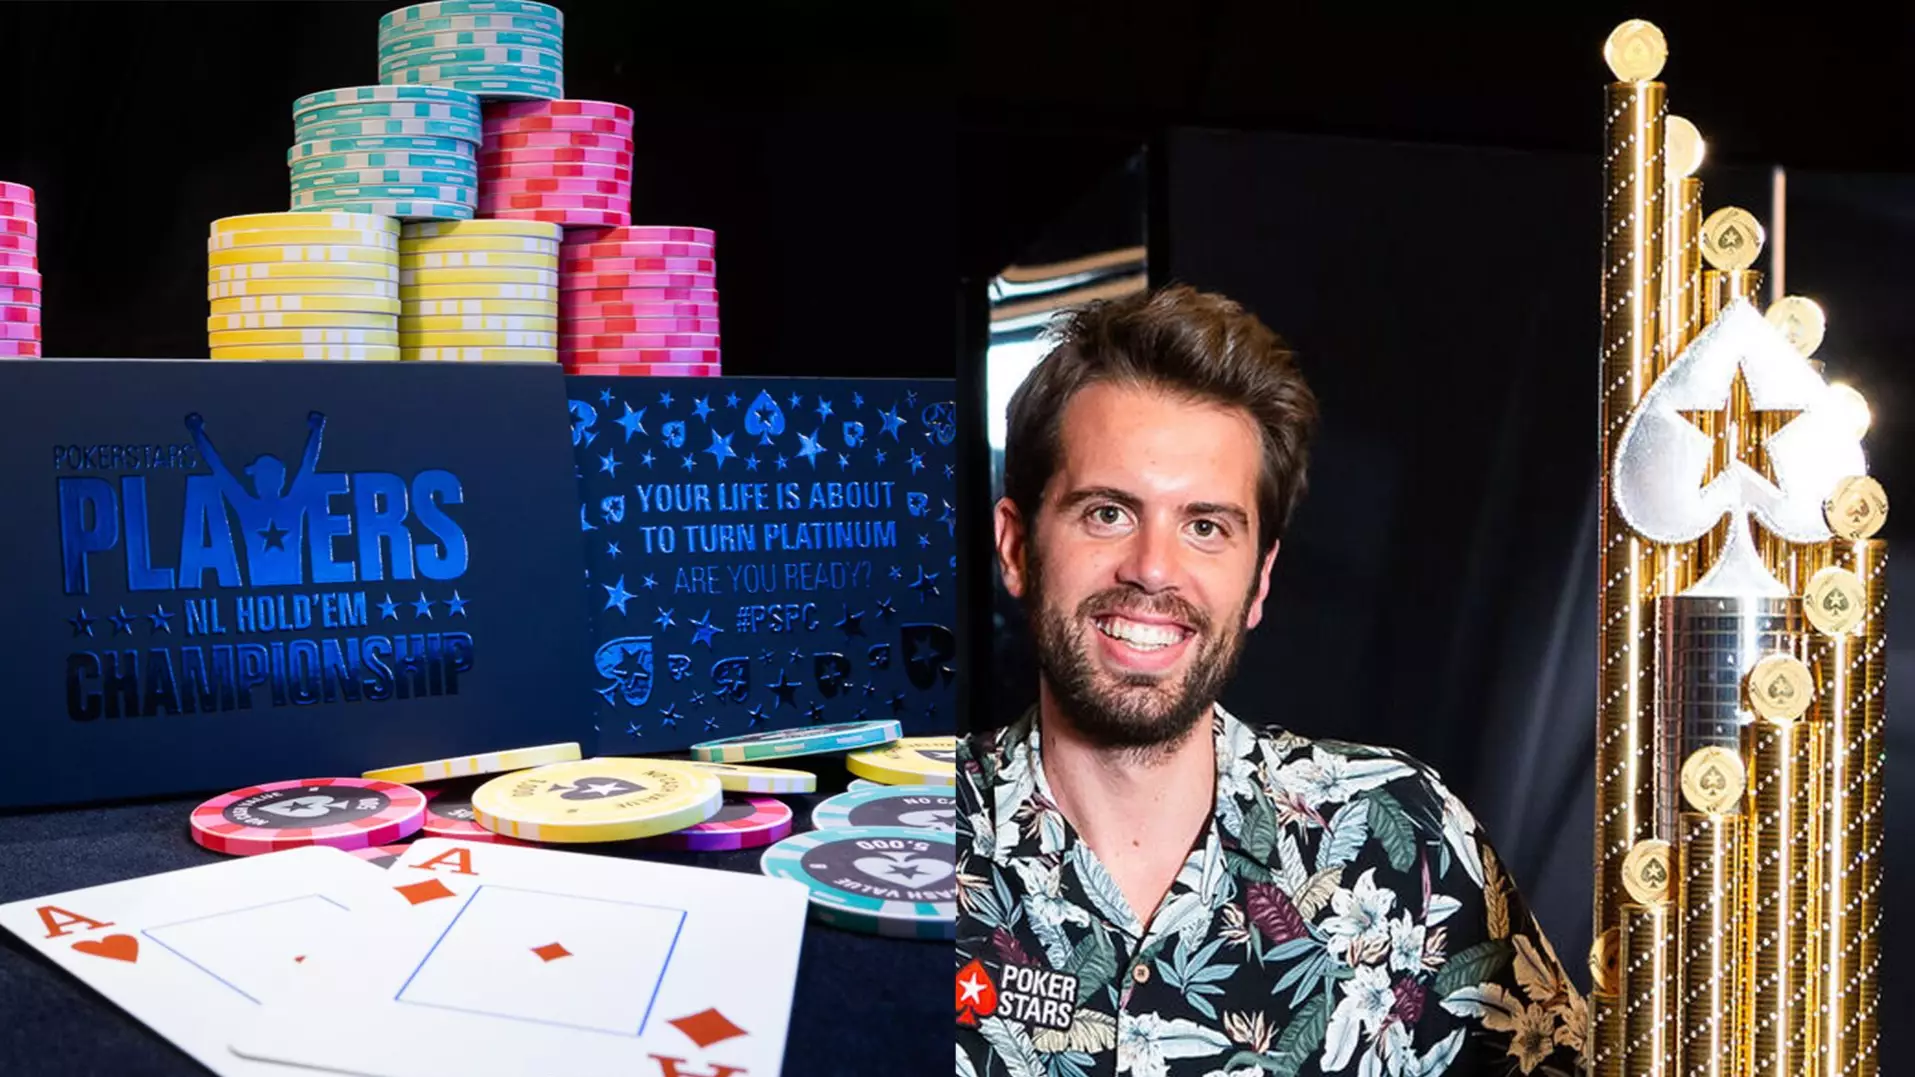 Win The Poker Experience Of A Lifetime In Barcelona Worth Over €25,000